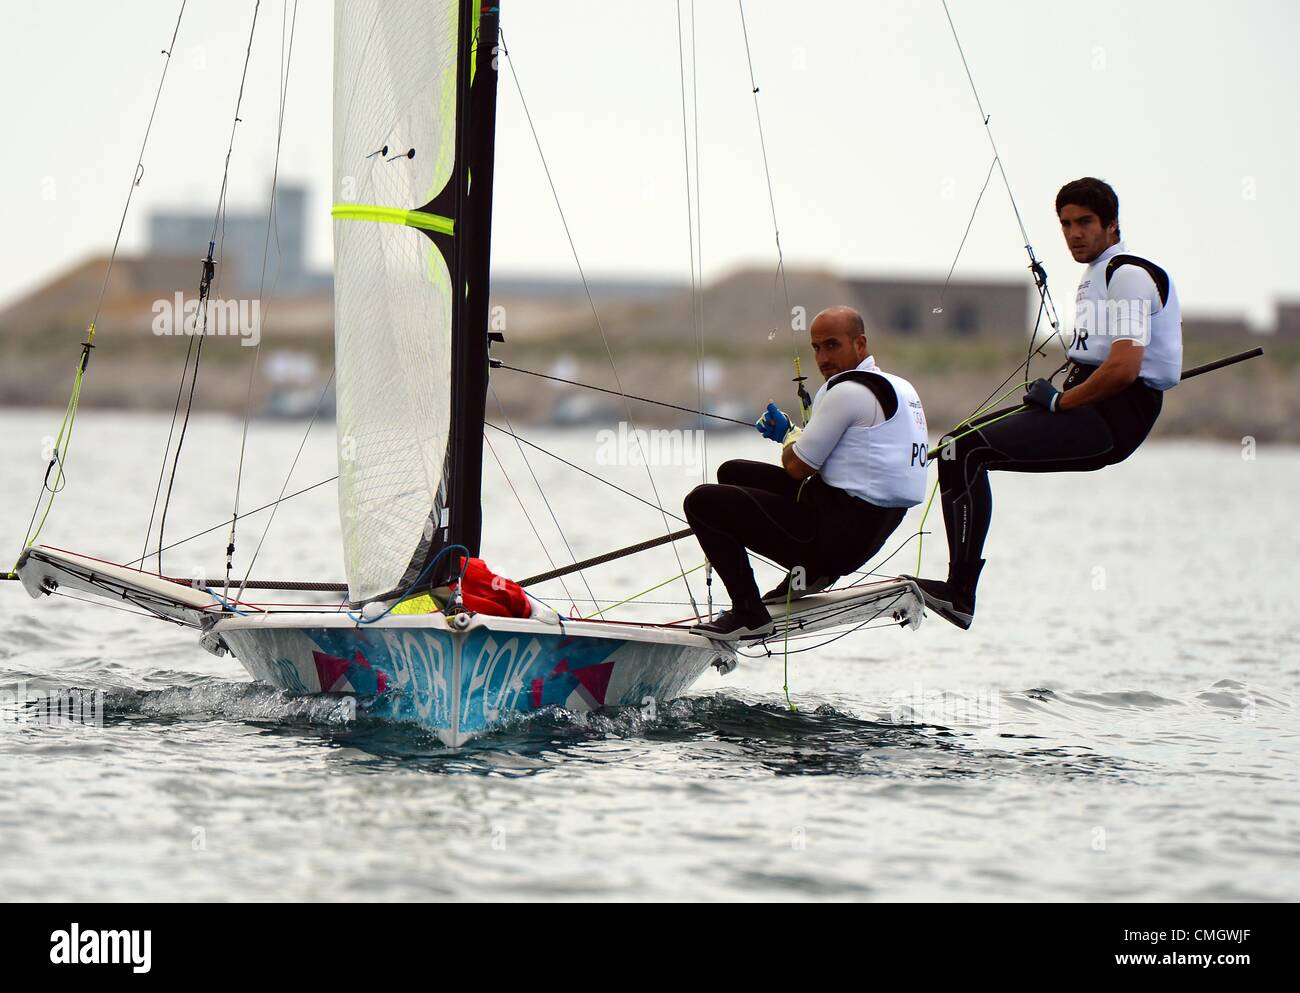 8th Aug 2012. Olympic Sailing, action during the London 2012 Olympic Games at the Weymouth & Portland Venue, Dorset, Britain, UK.  Bernardo Freitas and Francisco Andrade of Portugal in the 49er Men's skiff medal race August 8th, 2012 PICTURE: DORSET MEDIA SERVICE Stock Photo